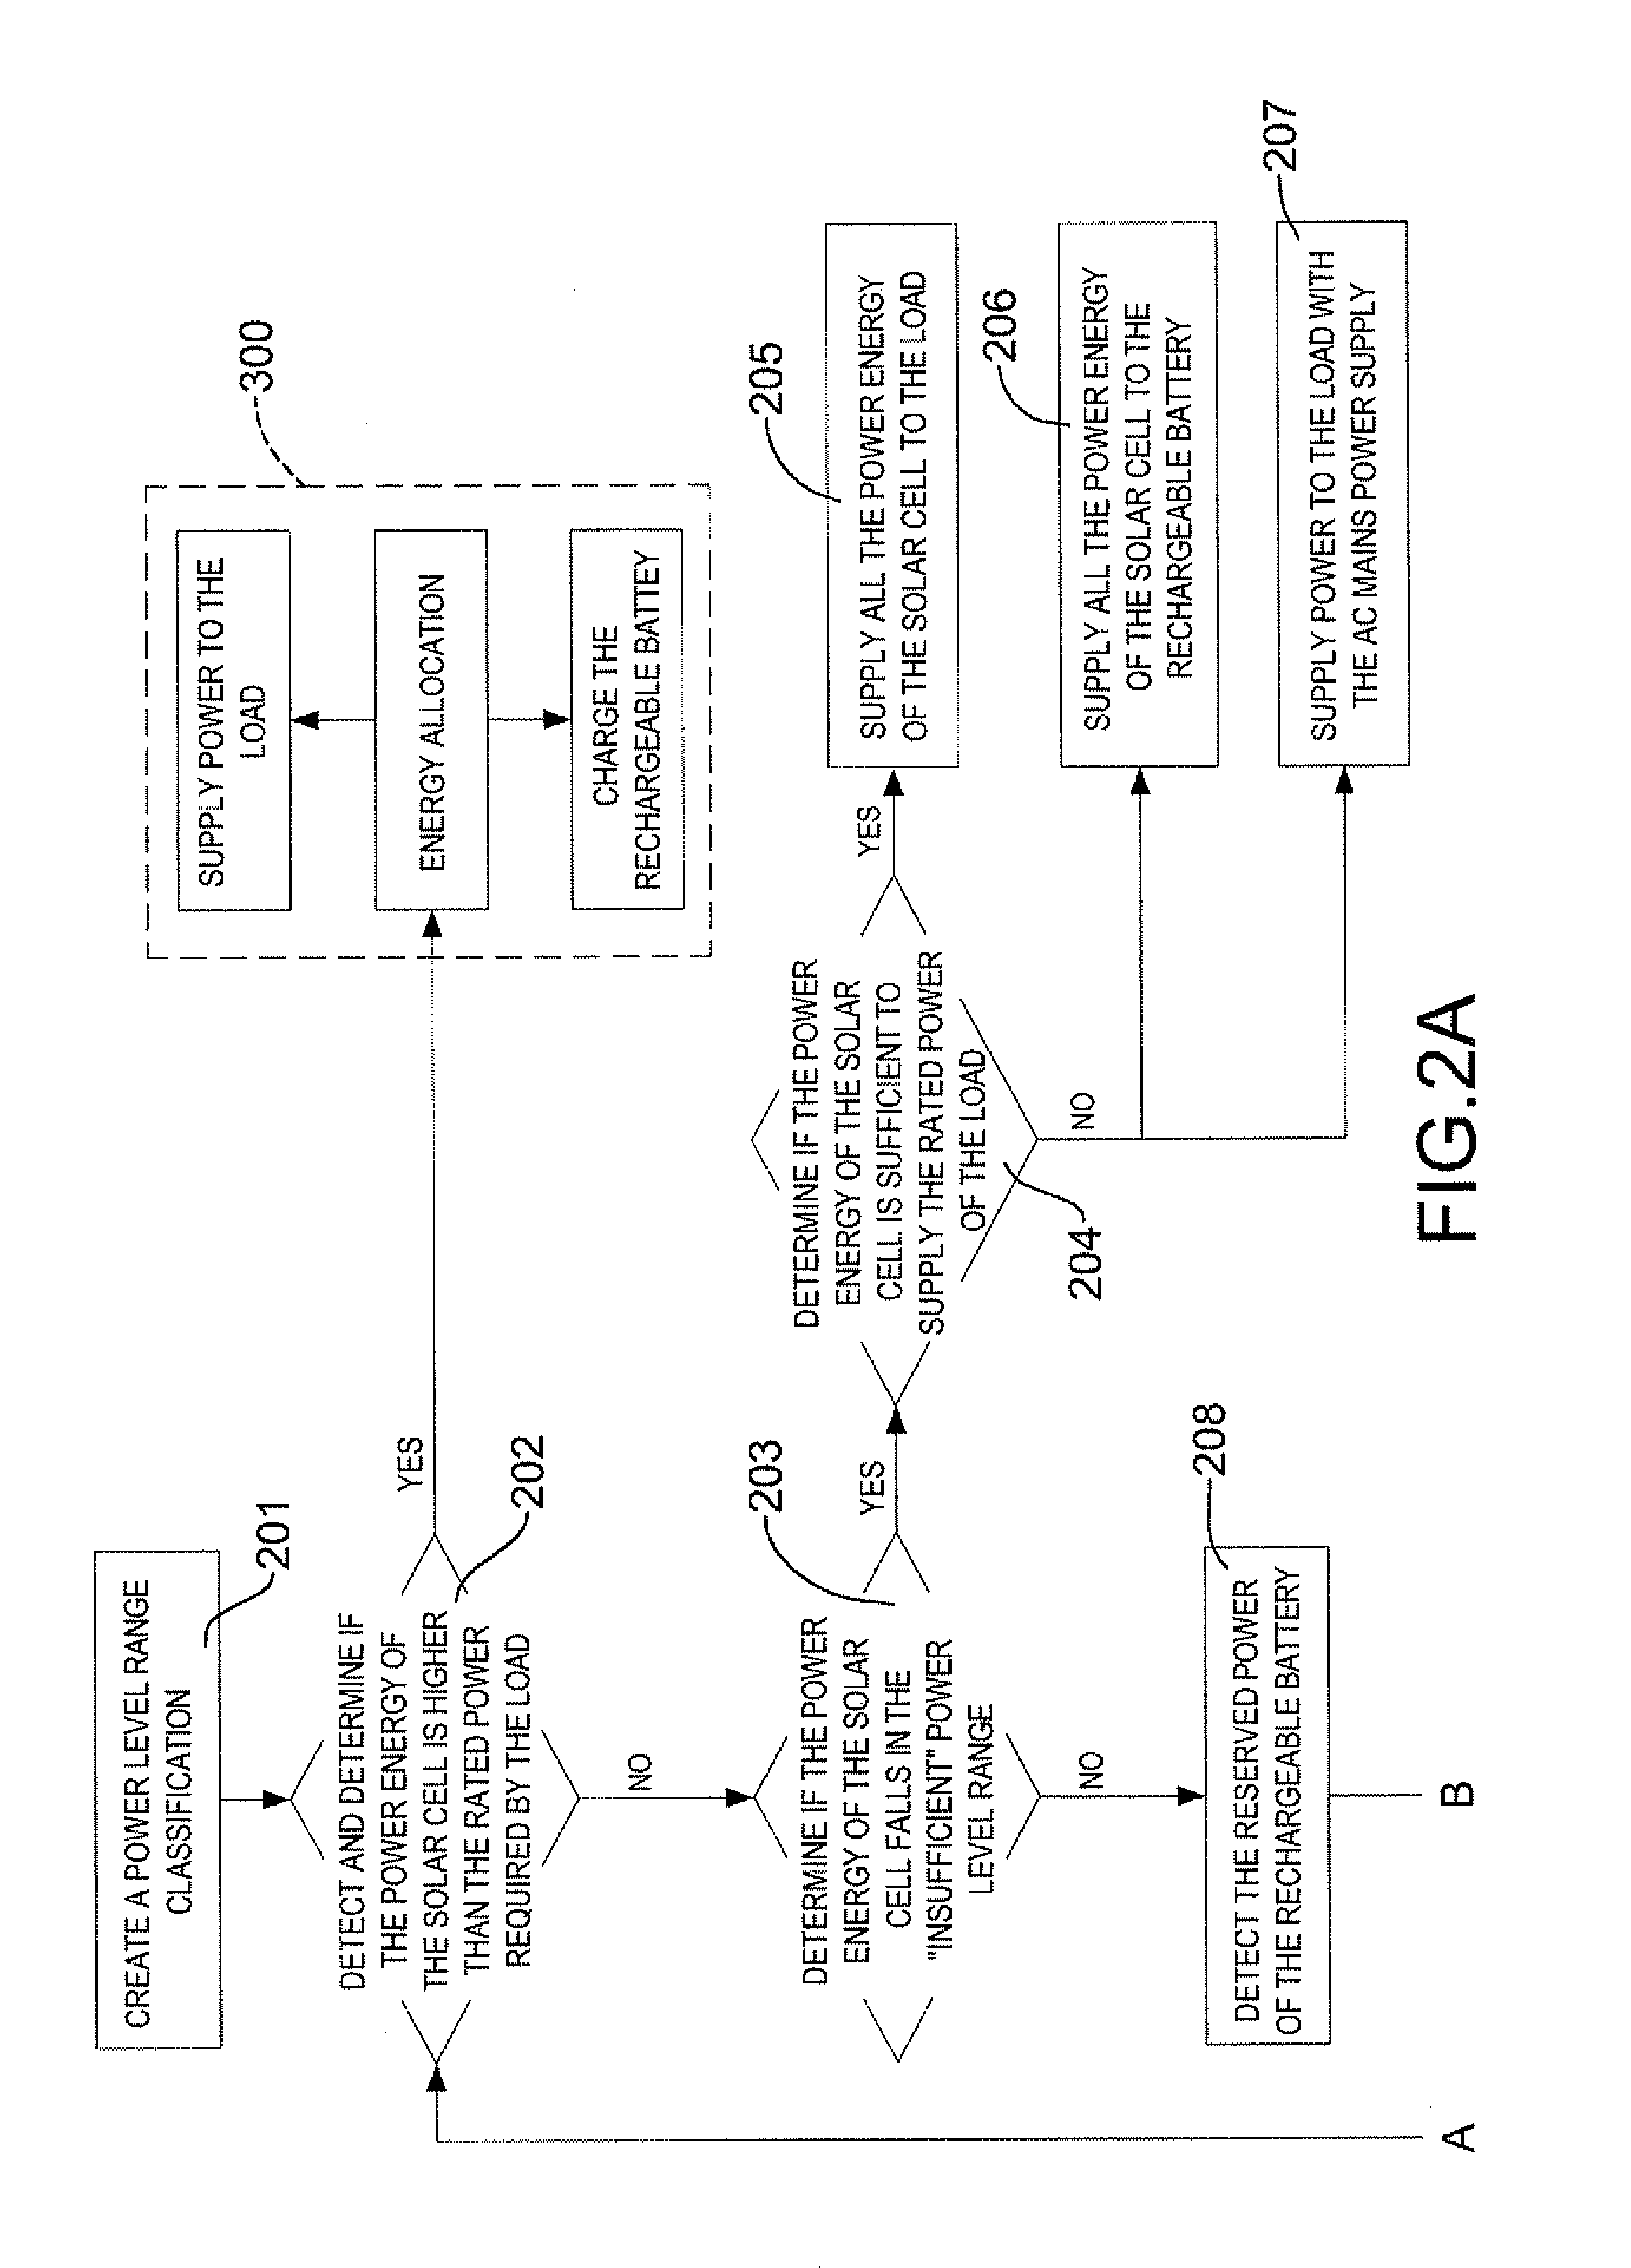 Method for solar power energy management with intelligent selection of operating modes